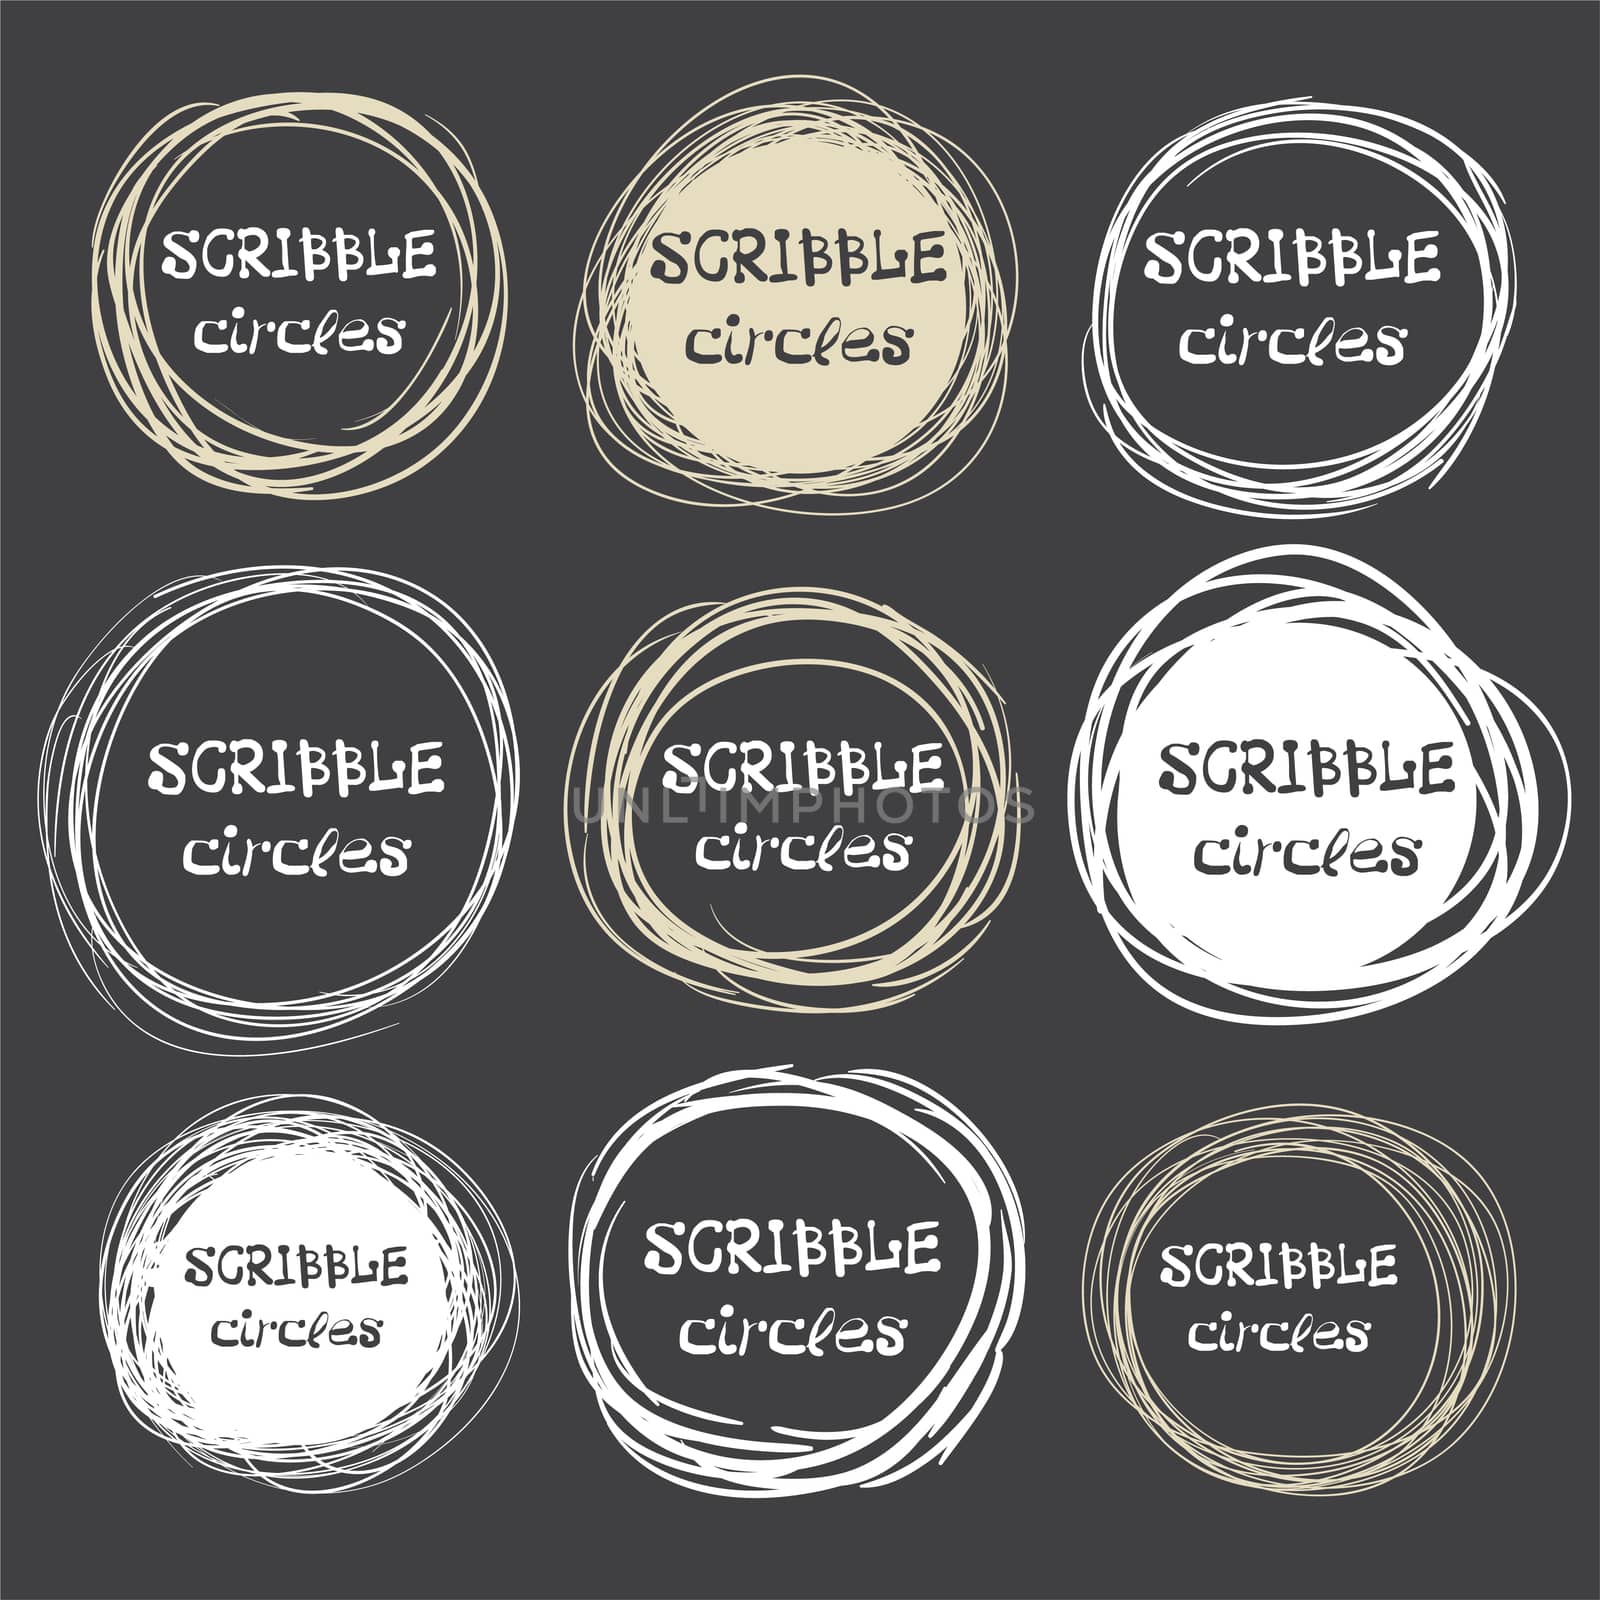 Collection of hand-drawn scribble circles against a dark background. by Adamchuk